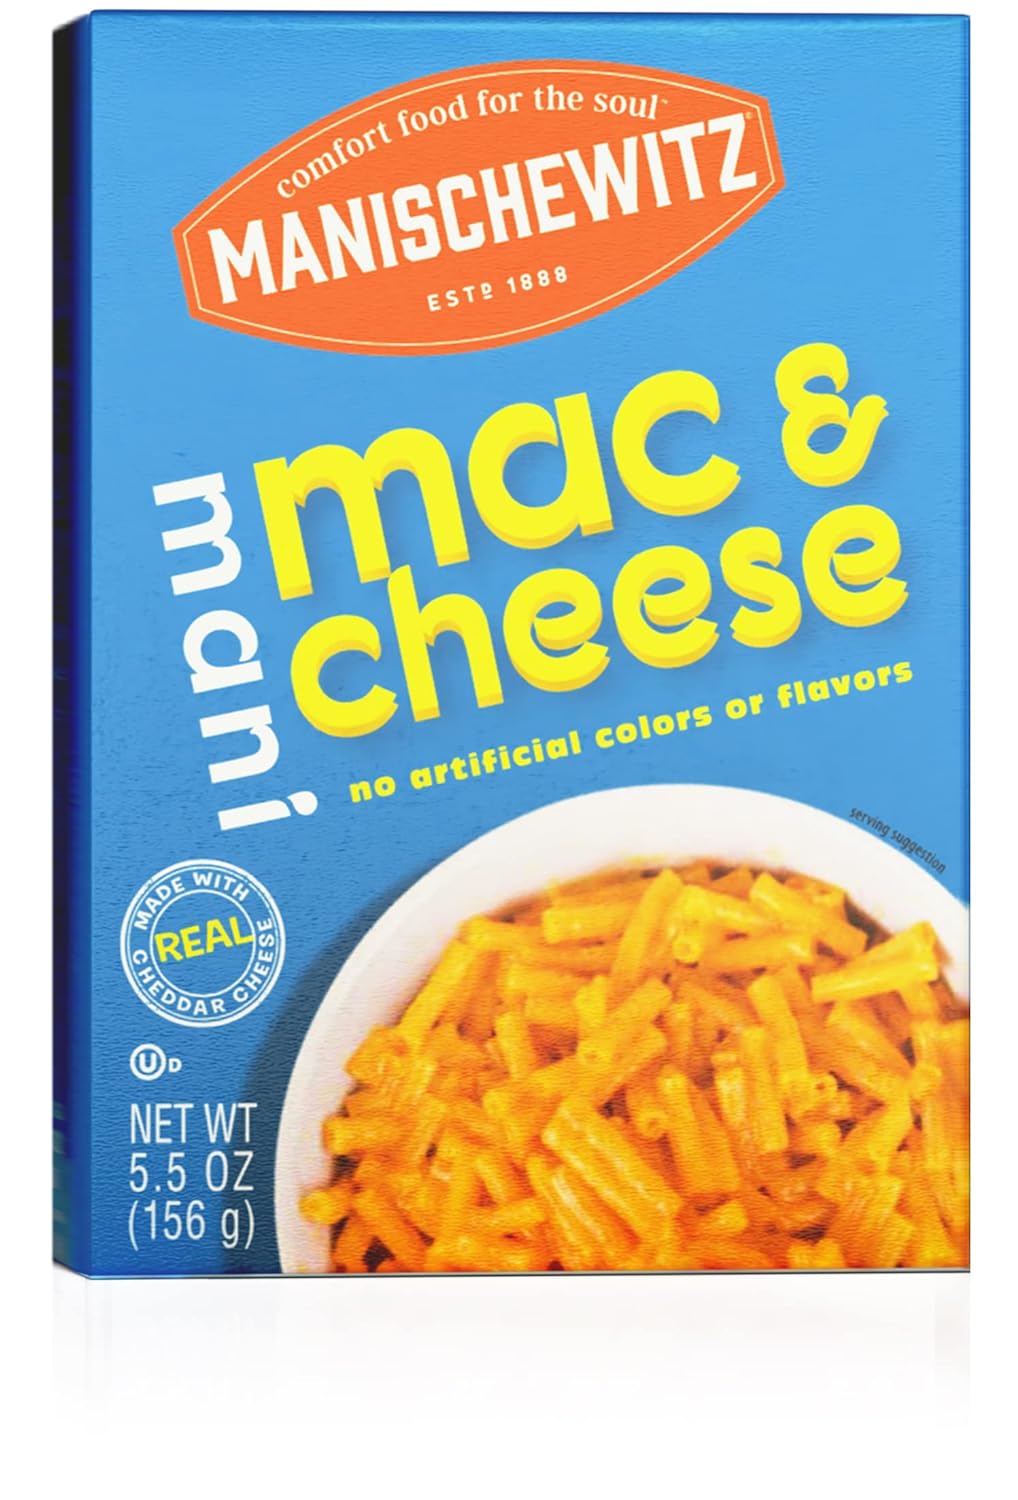 Manischewitz Kosher Mac & Cheese, 5.5oz, Made with Real Cheddar Cheese, No Artificial Colors of Flavors, Certified Kosher